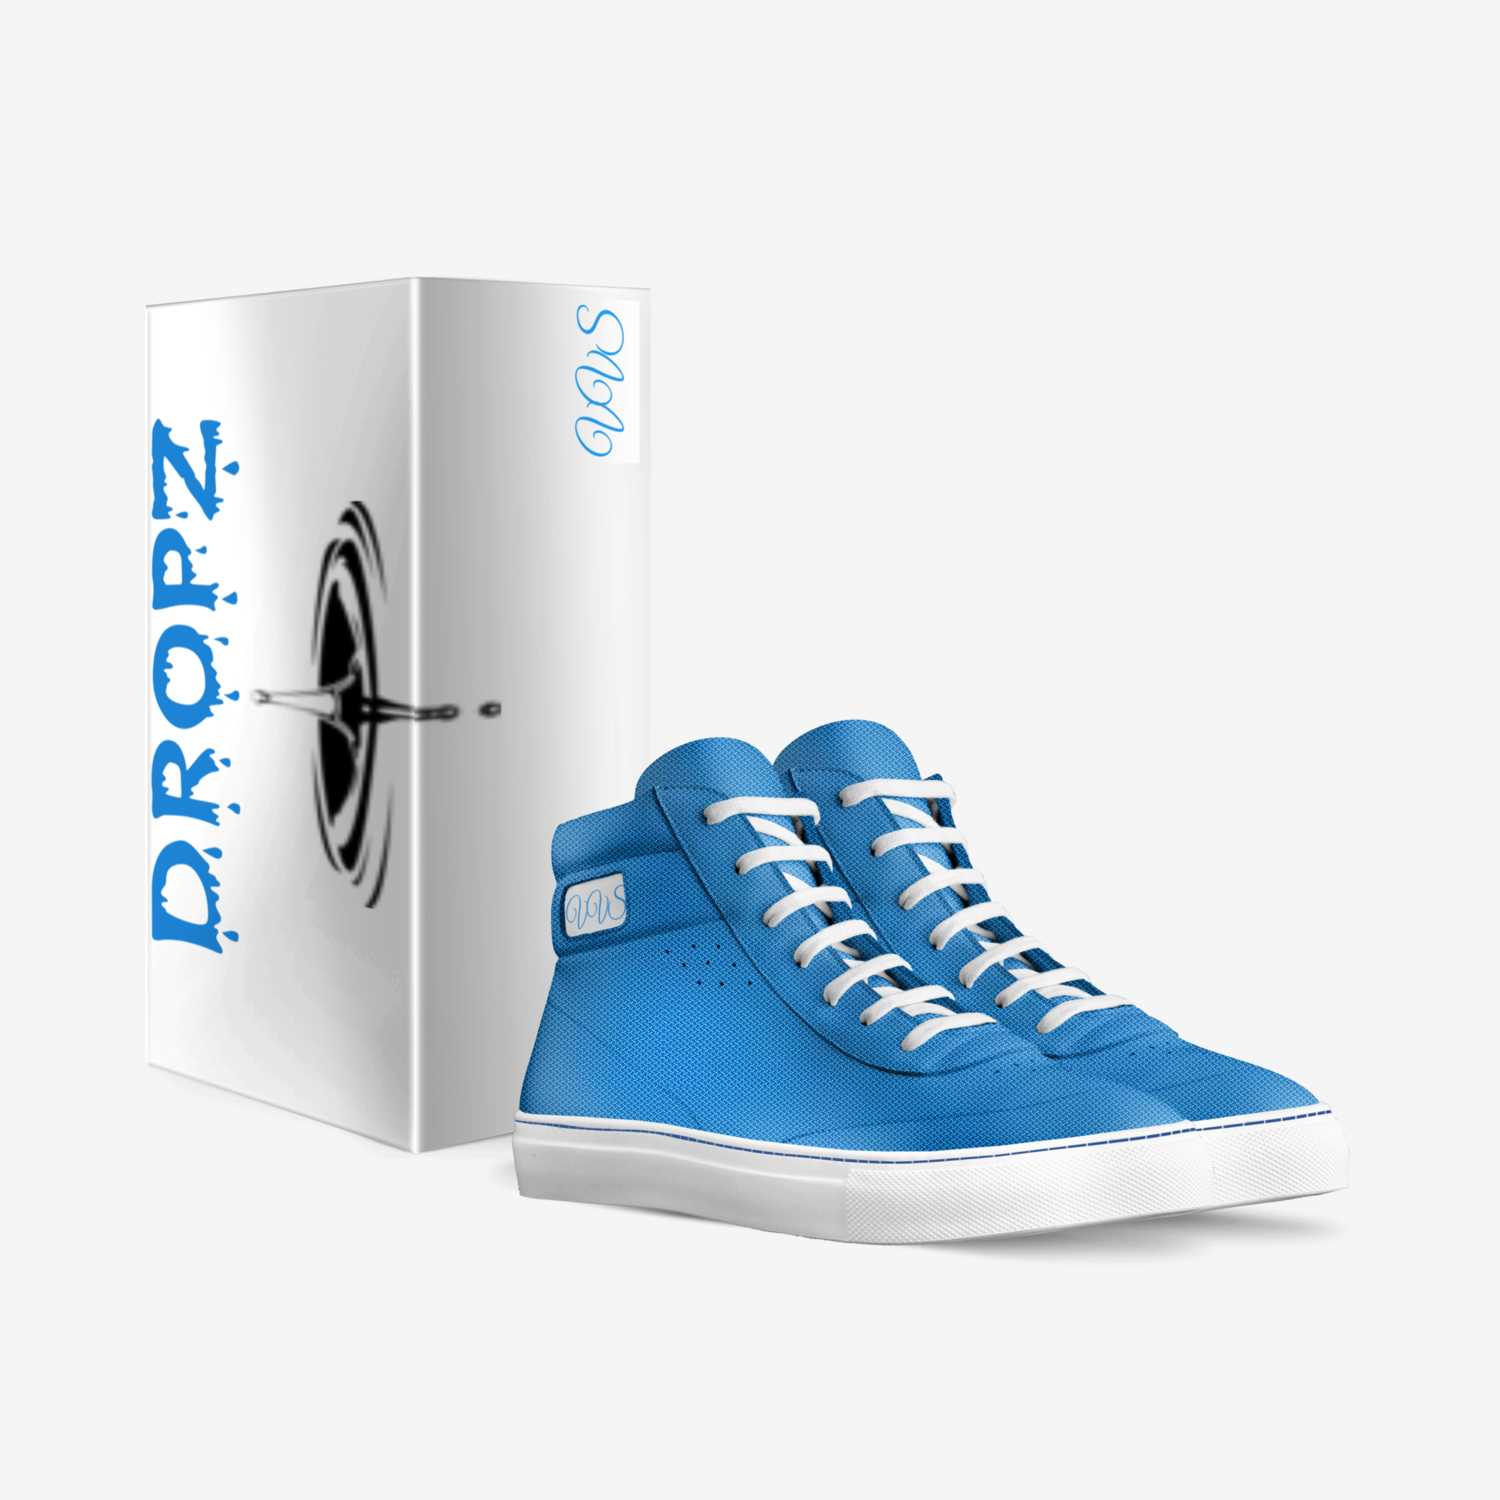 Dropz (Jet Blue) custom made in Italy shoes by Tyrone Wood | Box view